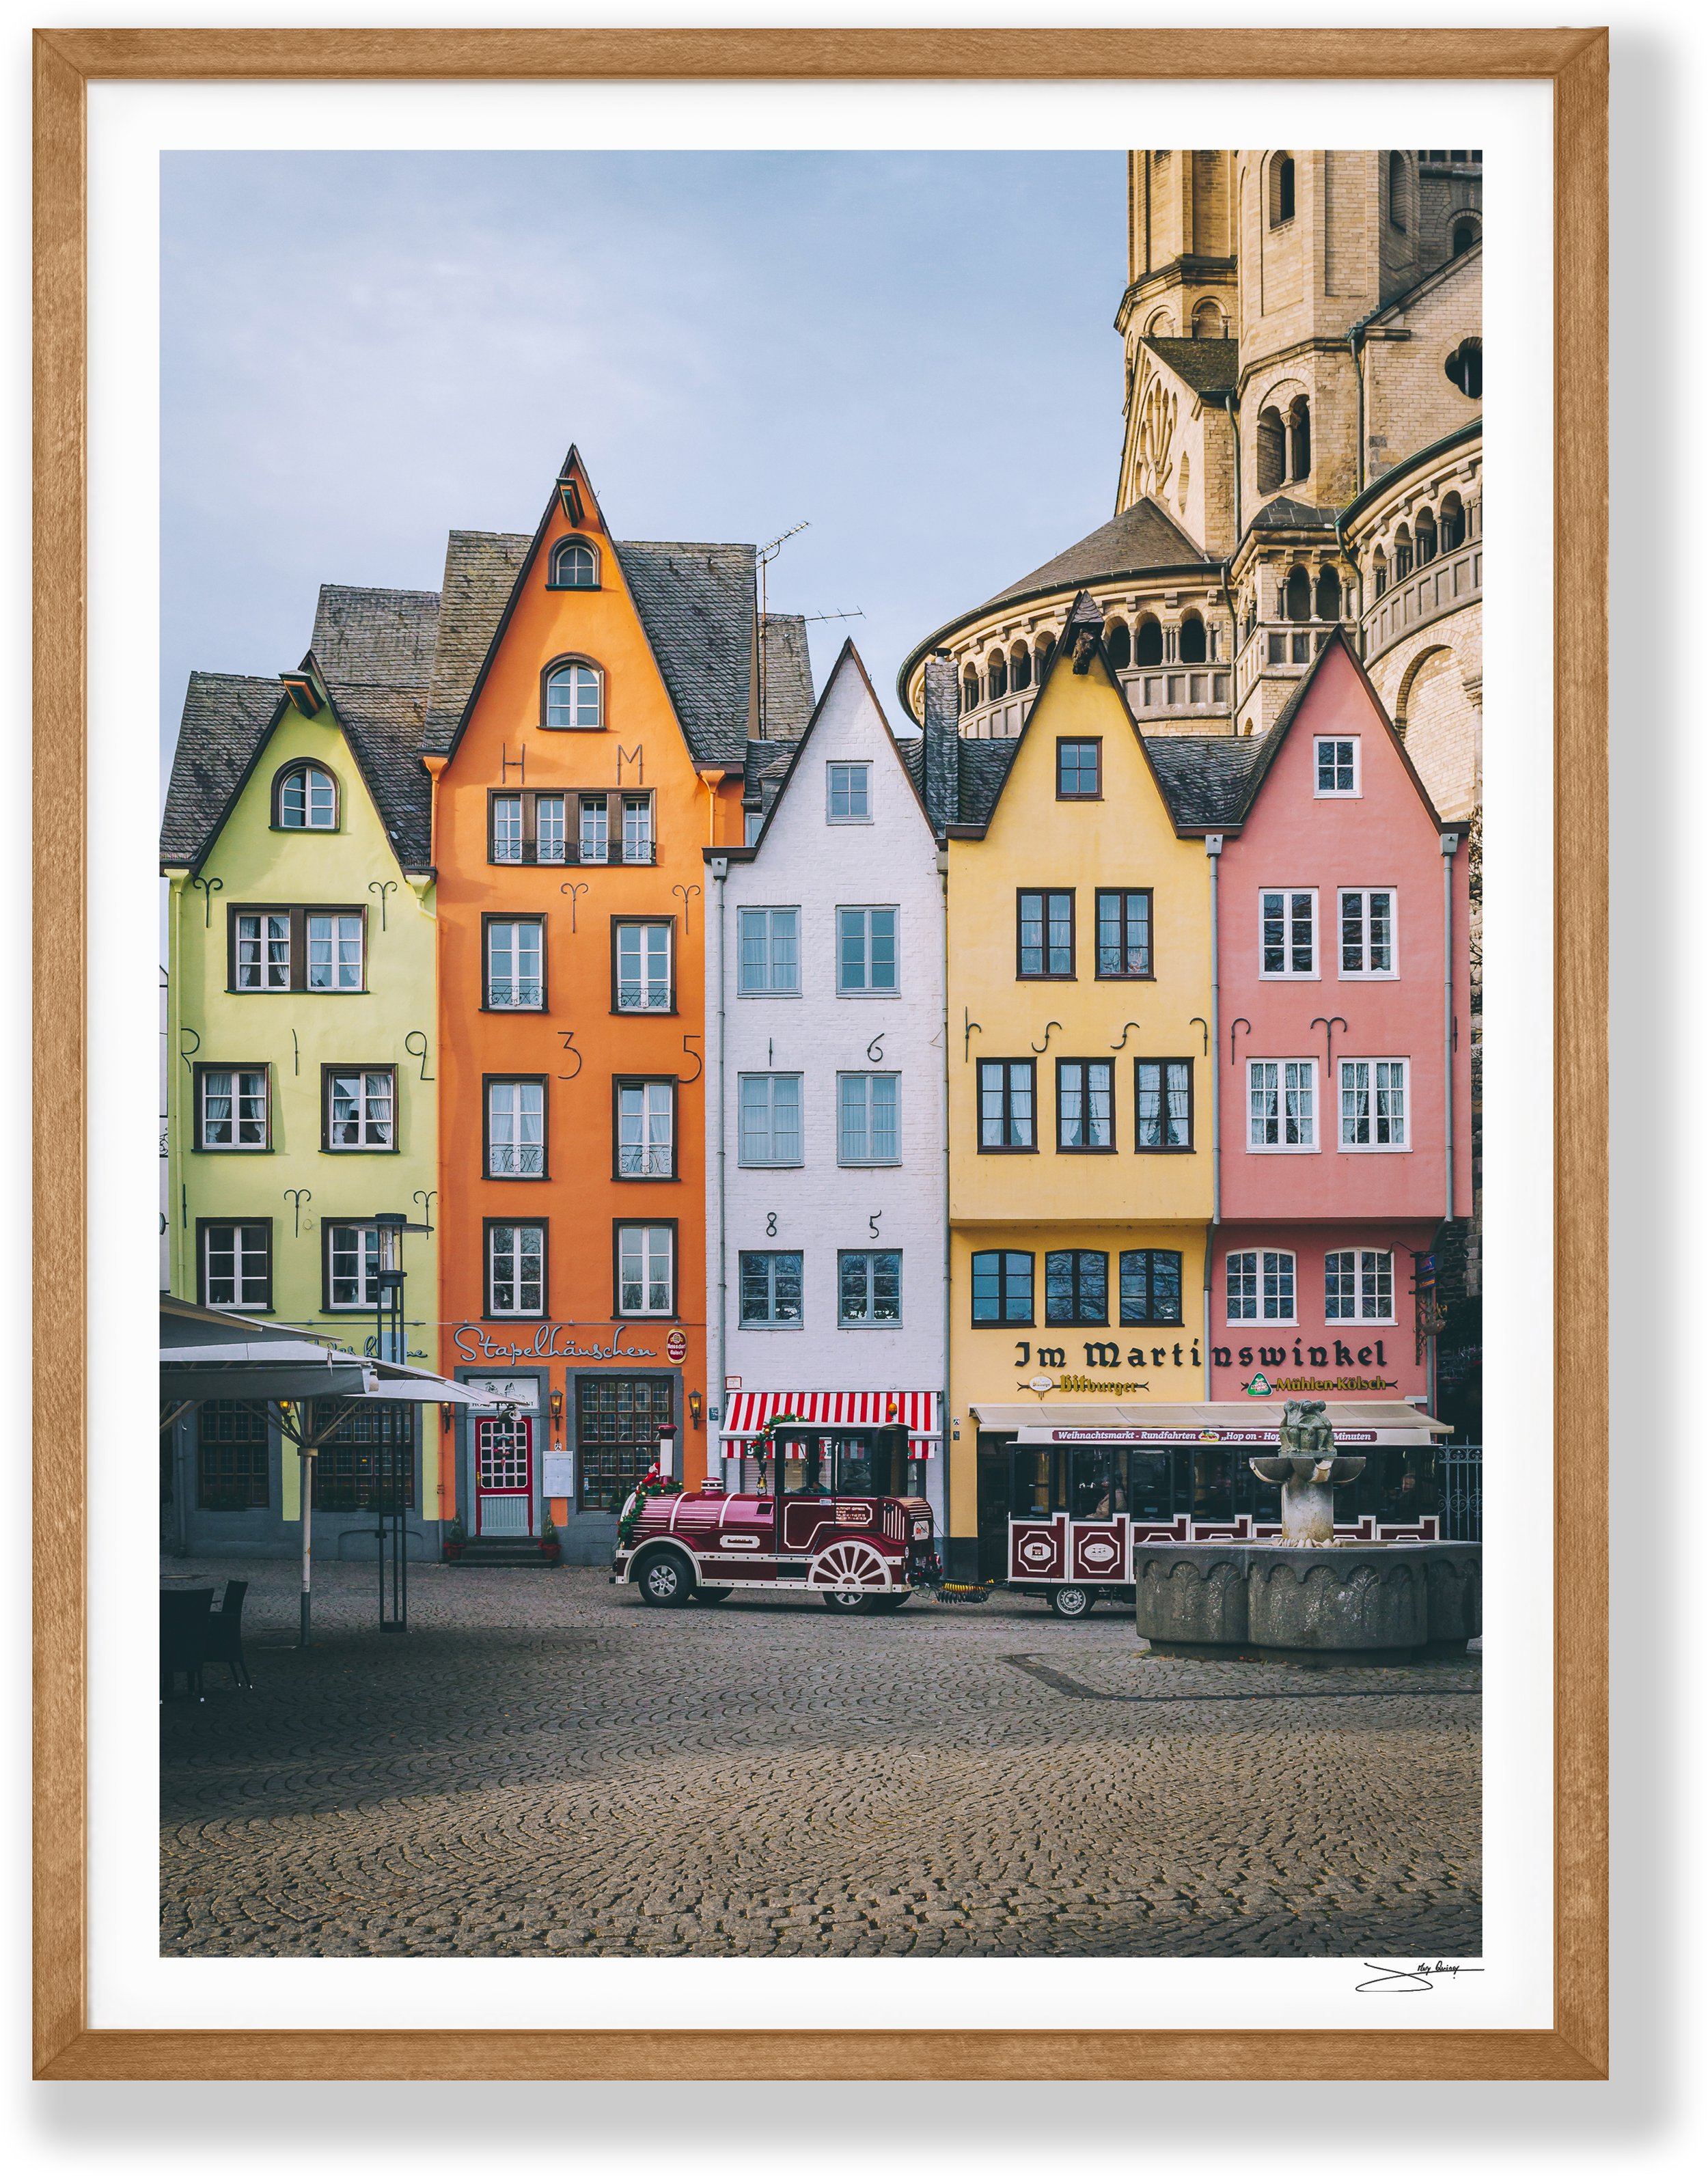 The colorful houses of Cologne